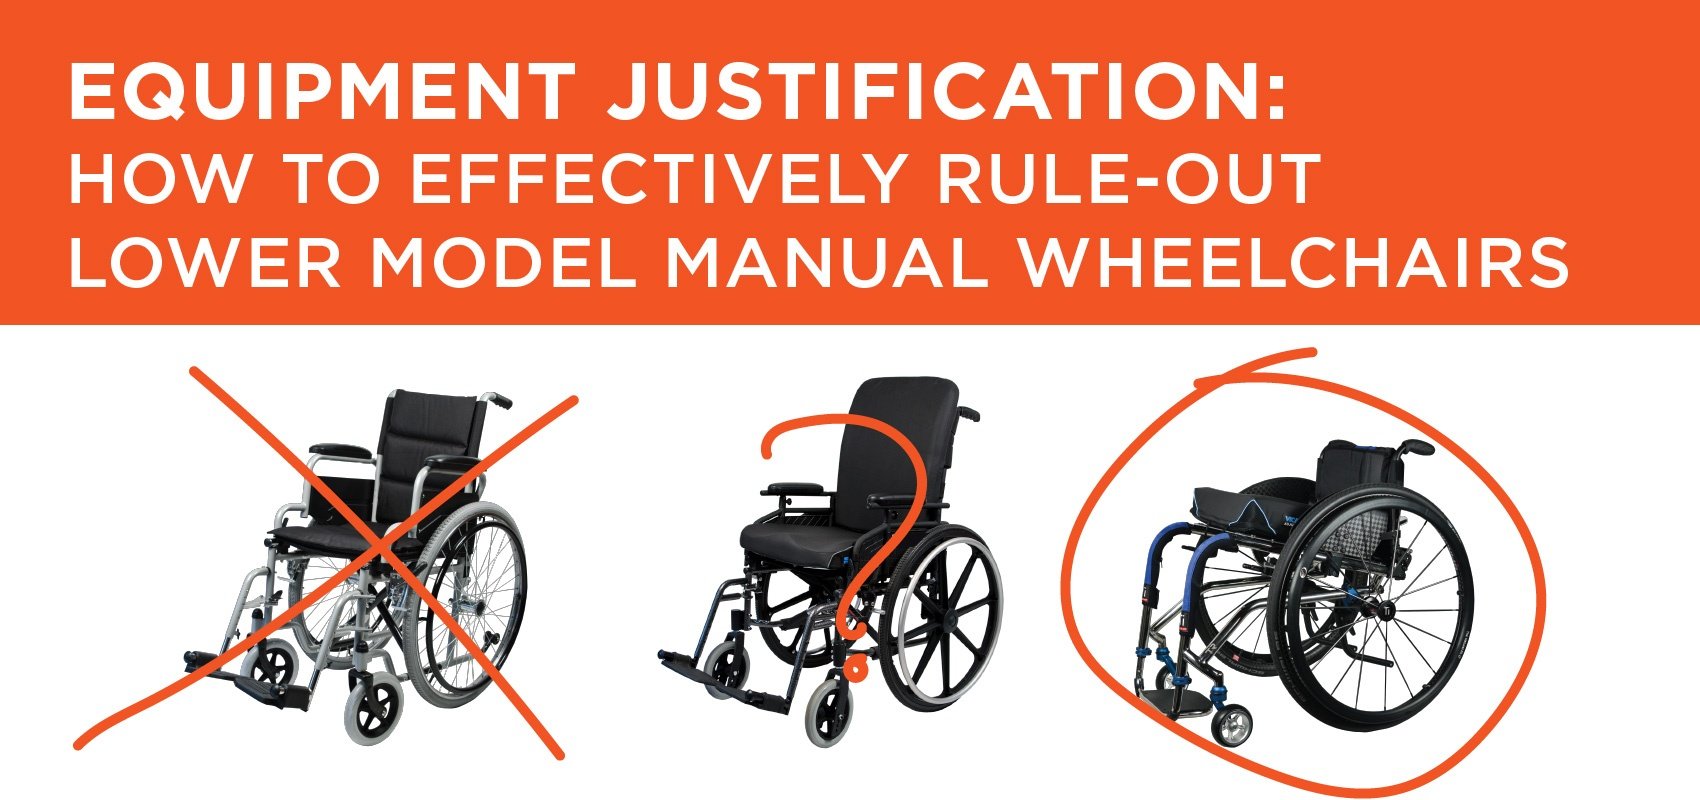 Blog-12-Manual-Wheelchair-Rule-Out